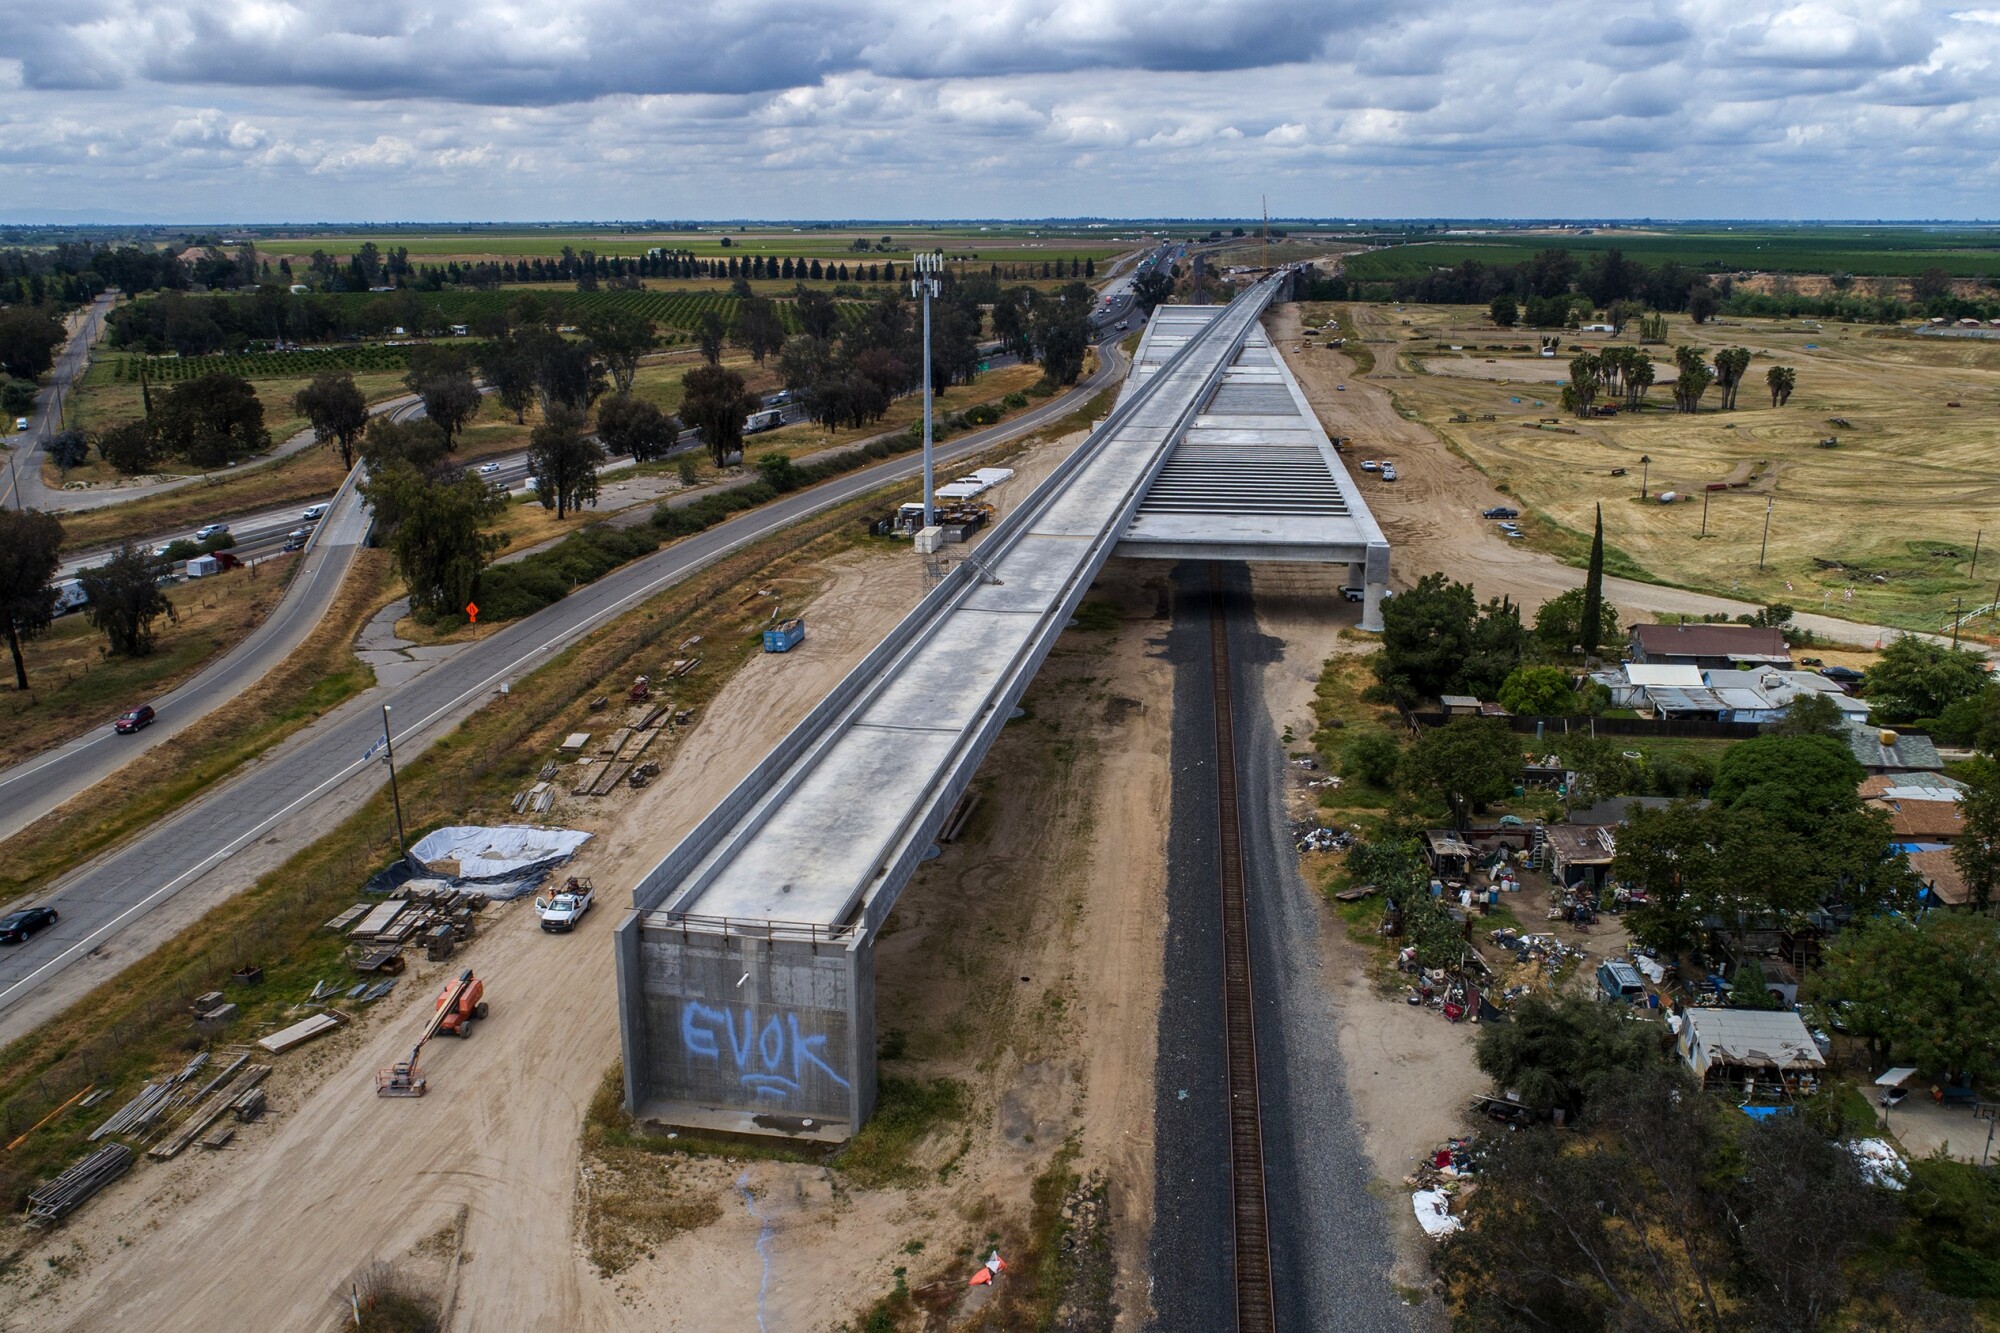 Aerial view of construction site at a viaduct near a rural road